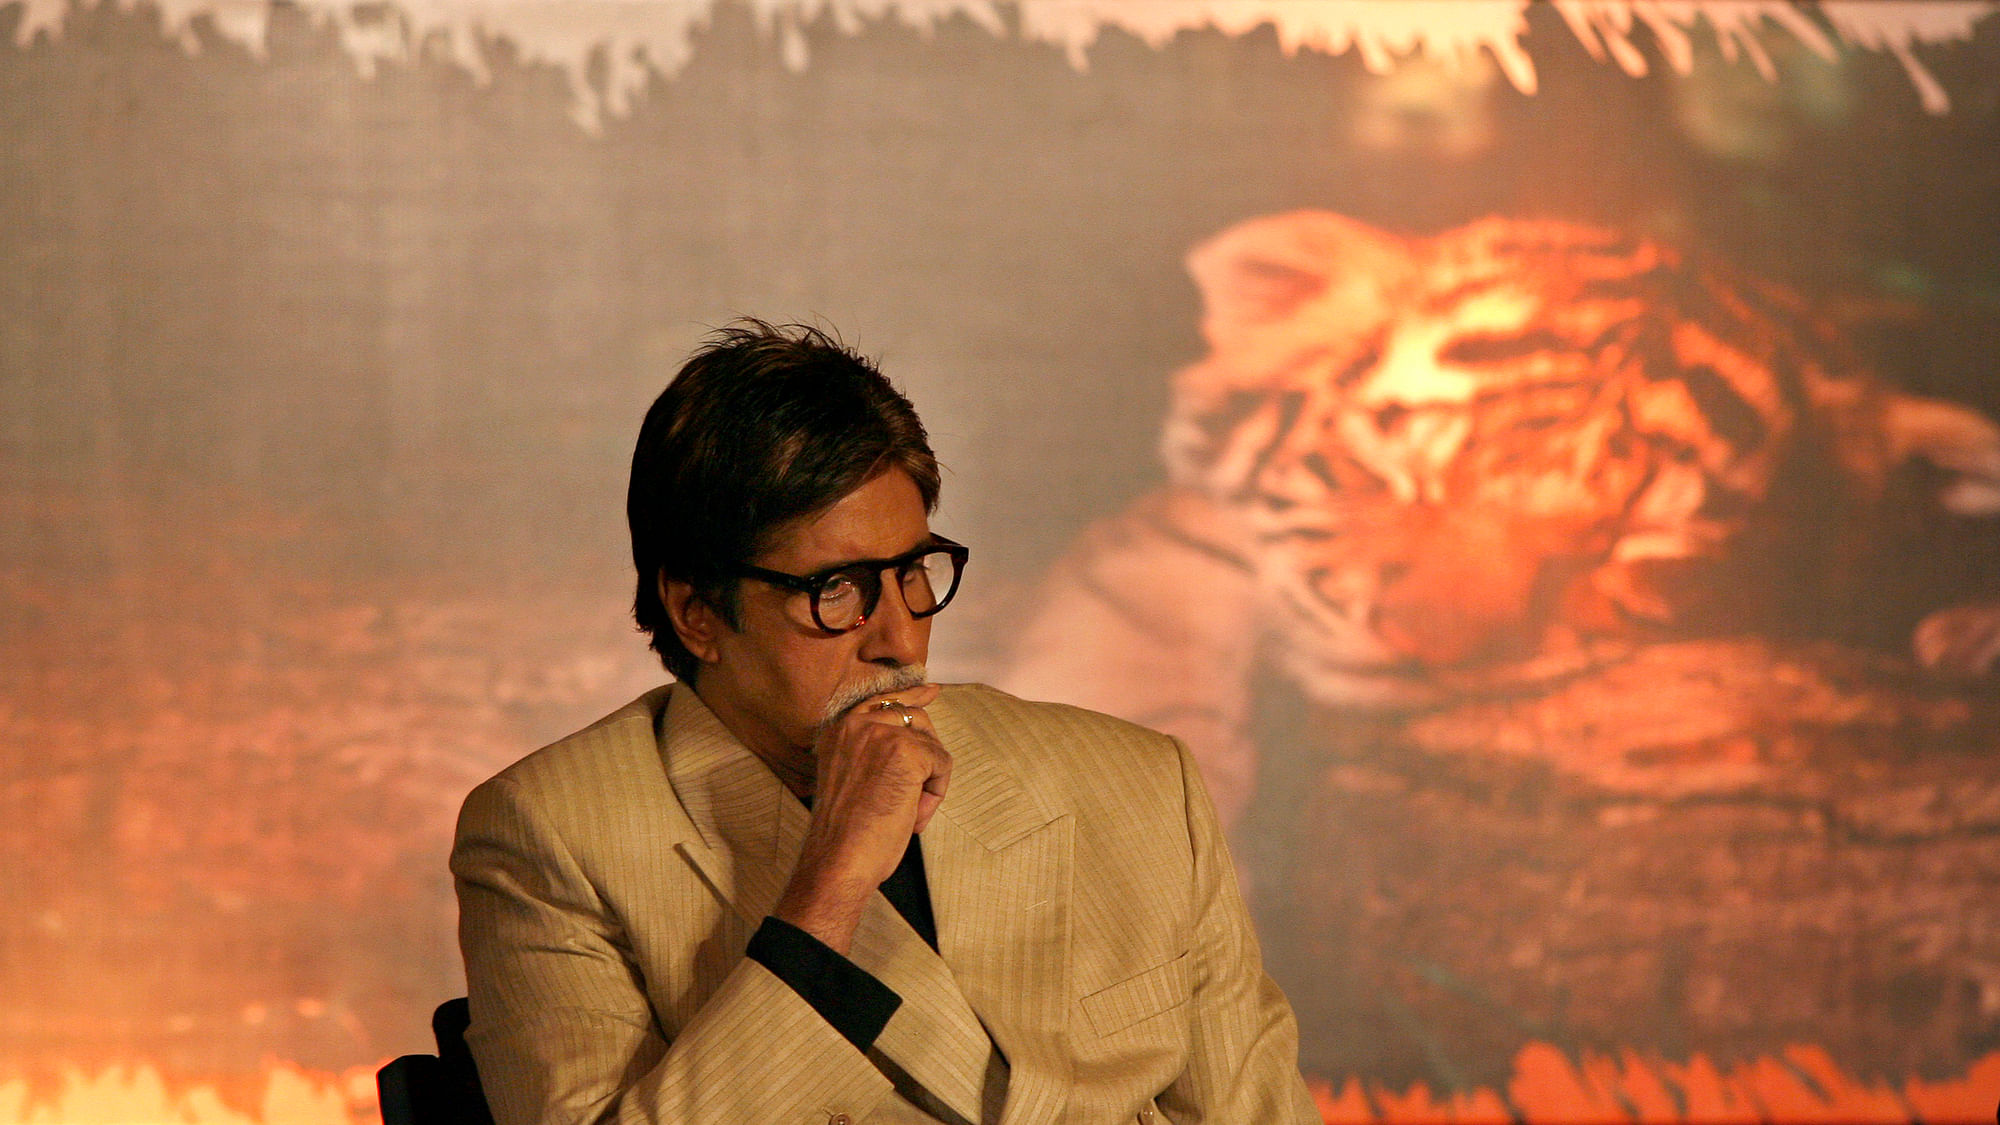  Bollywood actor Amitabh Bachchan at an event. (Photo: Reuters)